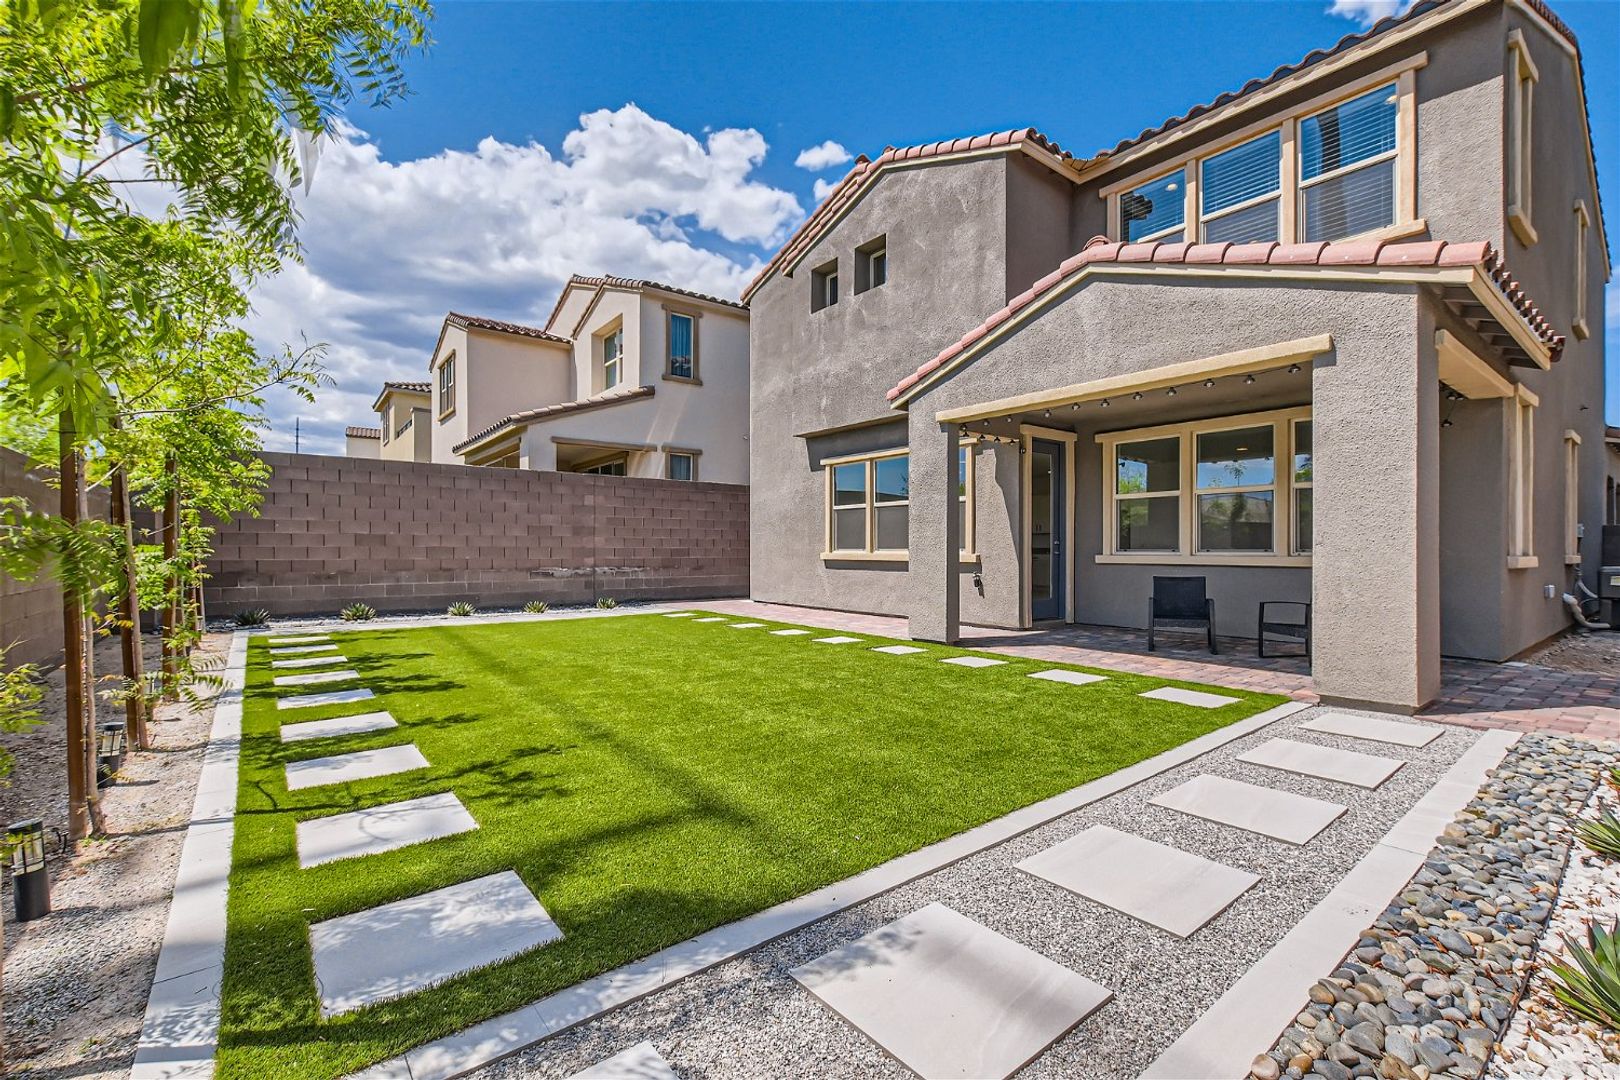 STUNNING 2 Story Home - BEAUTIFULLY Landscaped Backyard in SUMMERLIN!